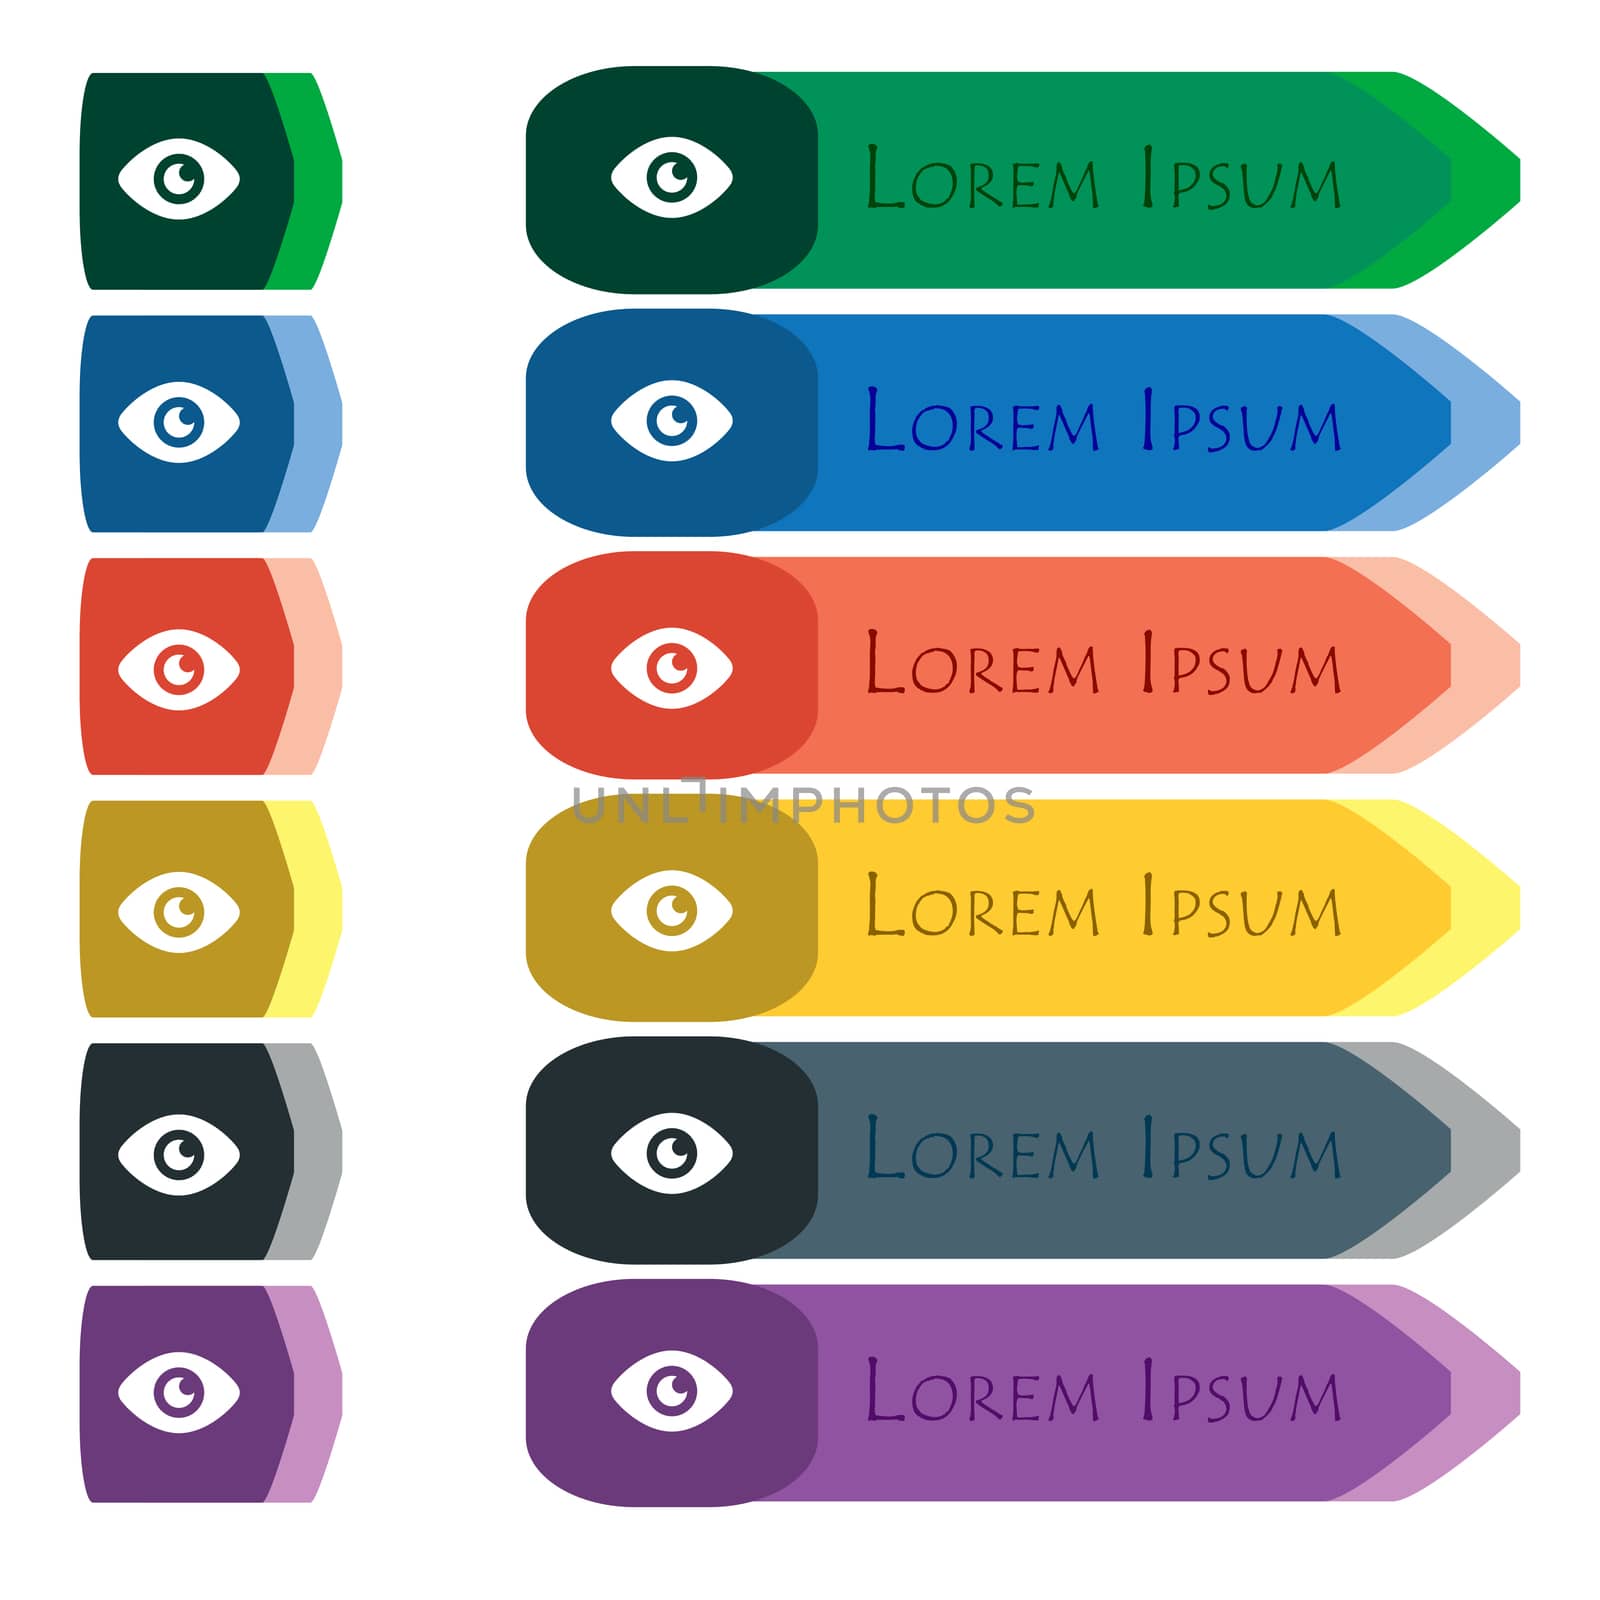 Eye, Publish content icon sign. Set of colorful, bright long buttons with additional small modules. Flat design. 